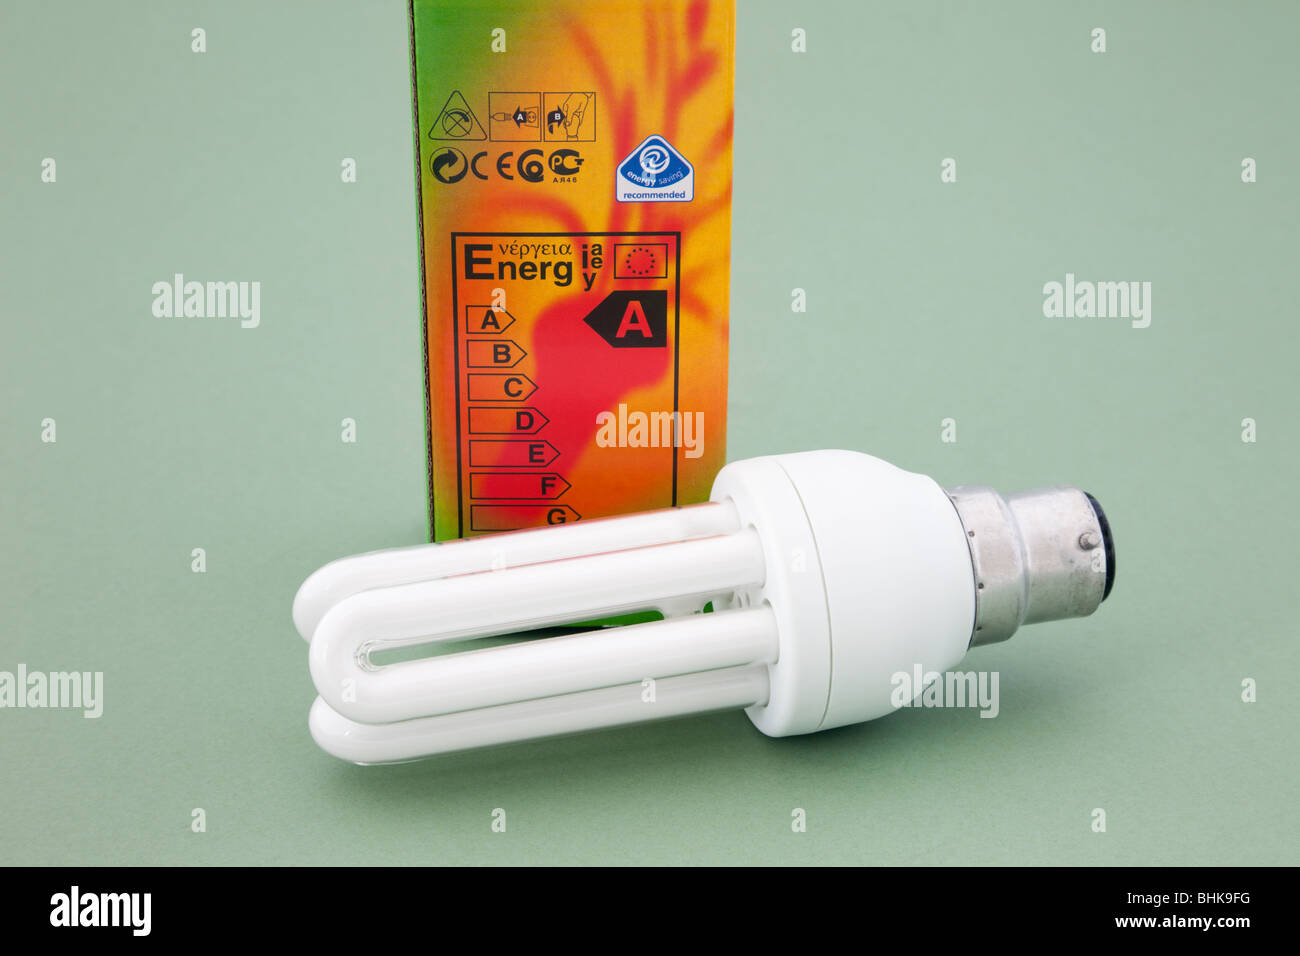 Studio UK Europe. Long life low energy light bulb and box with energy rating label on a green background Stock Photo